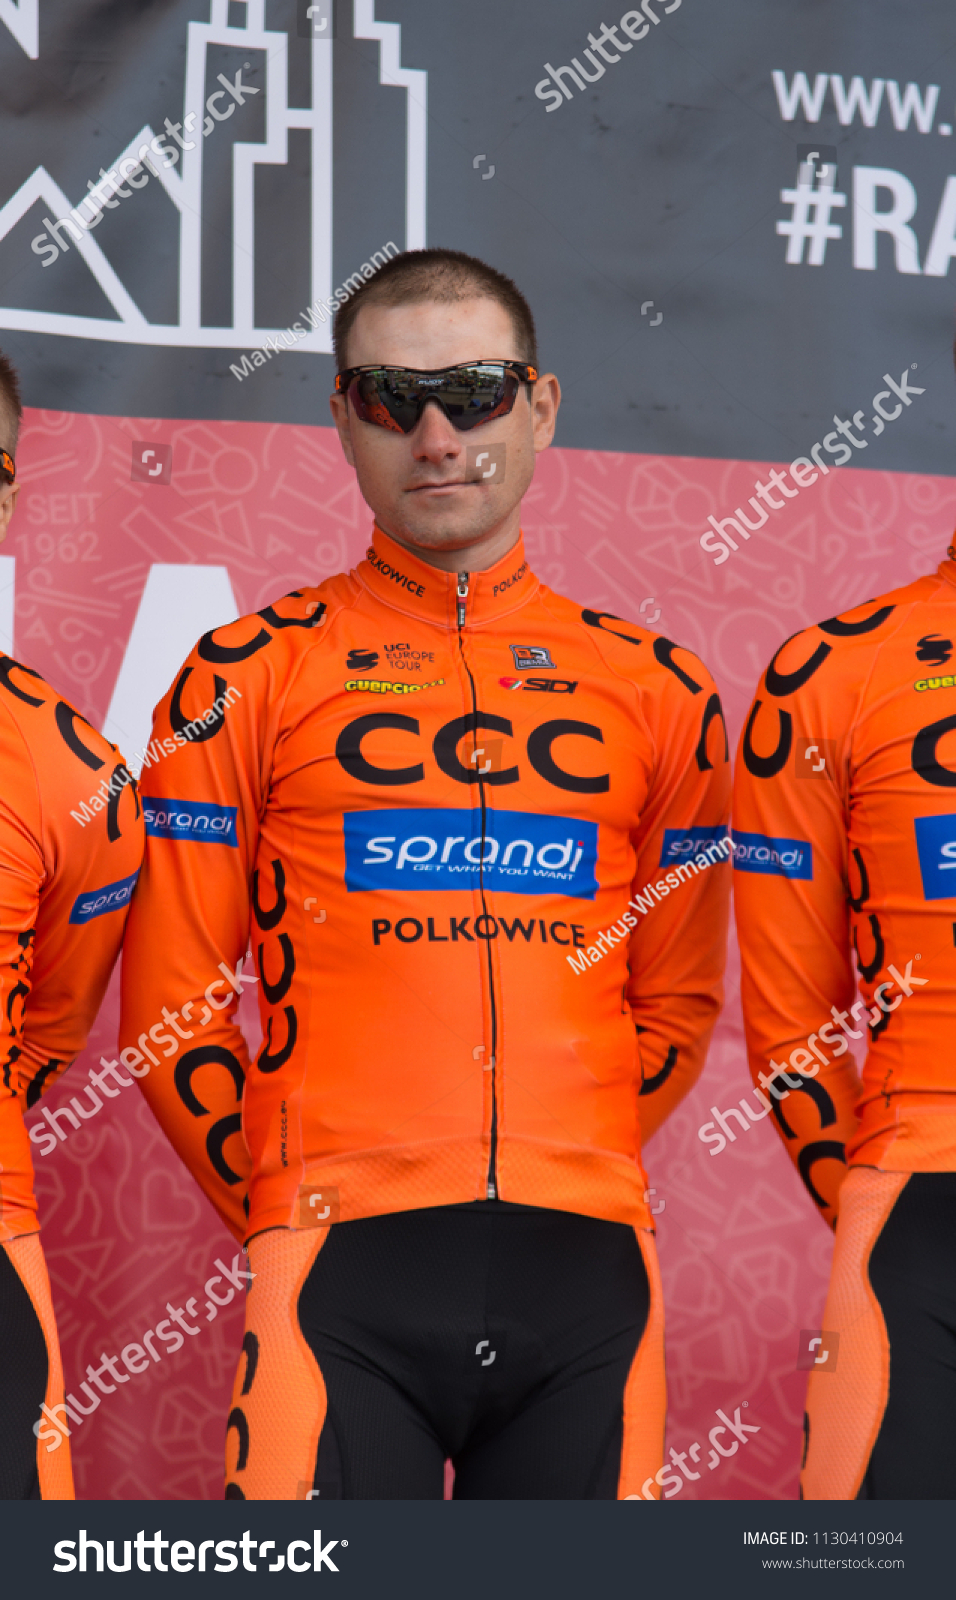 ccc polkowice cycling